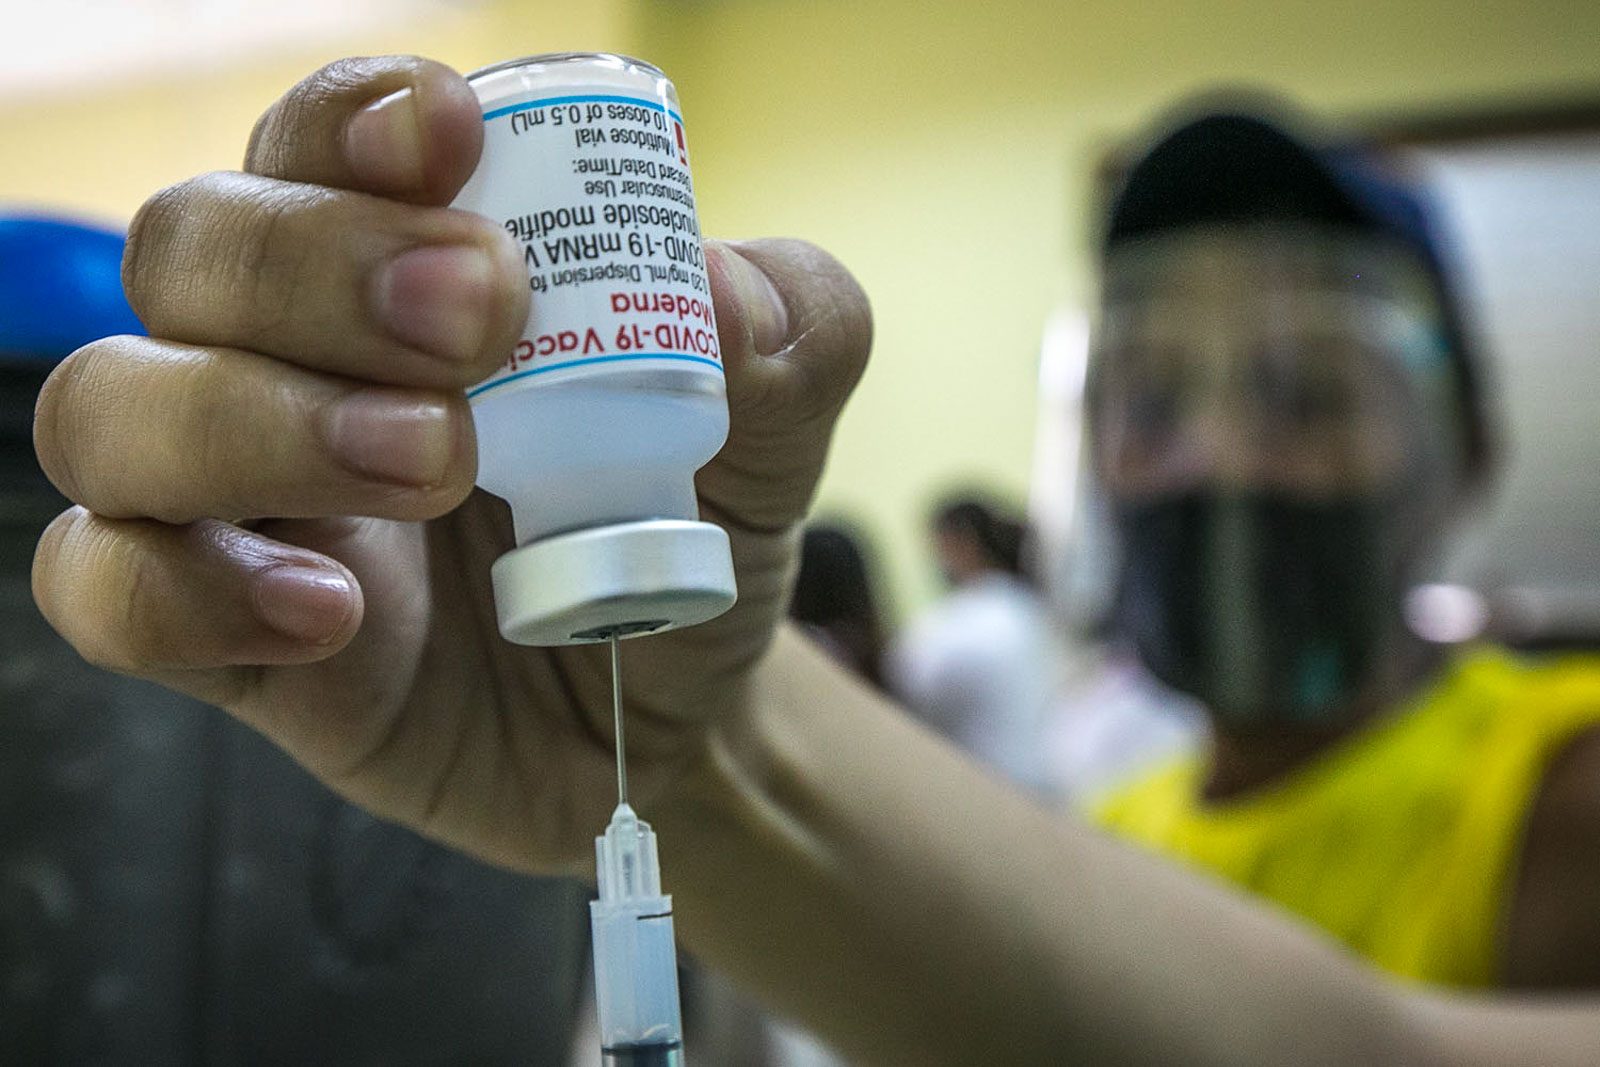 Philippines allows emergency use of Moderna vaccine on adolescents aged 12 to 17